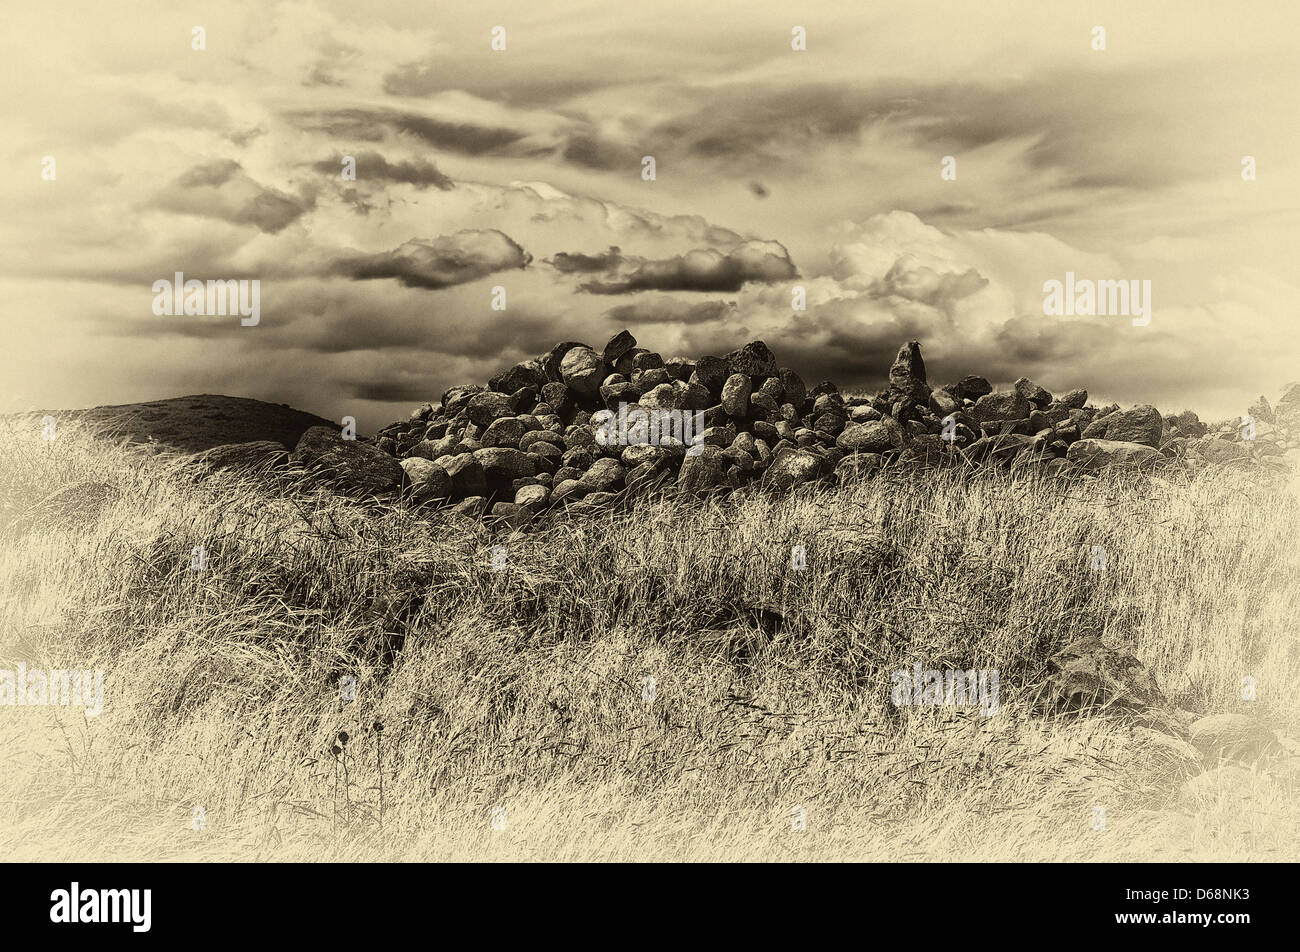 Digitally manipulated image of stones in a field with dramatic sky Stock Photo